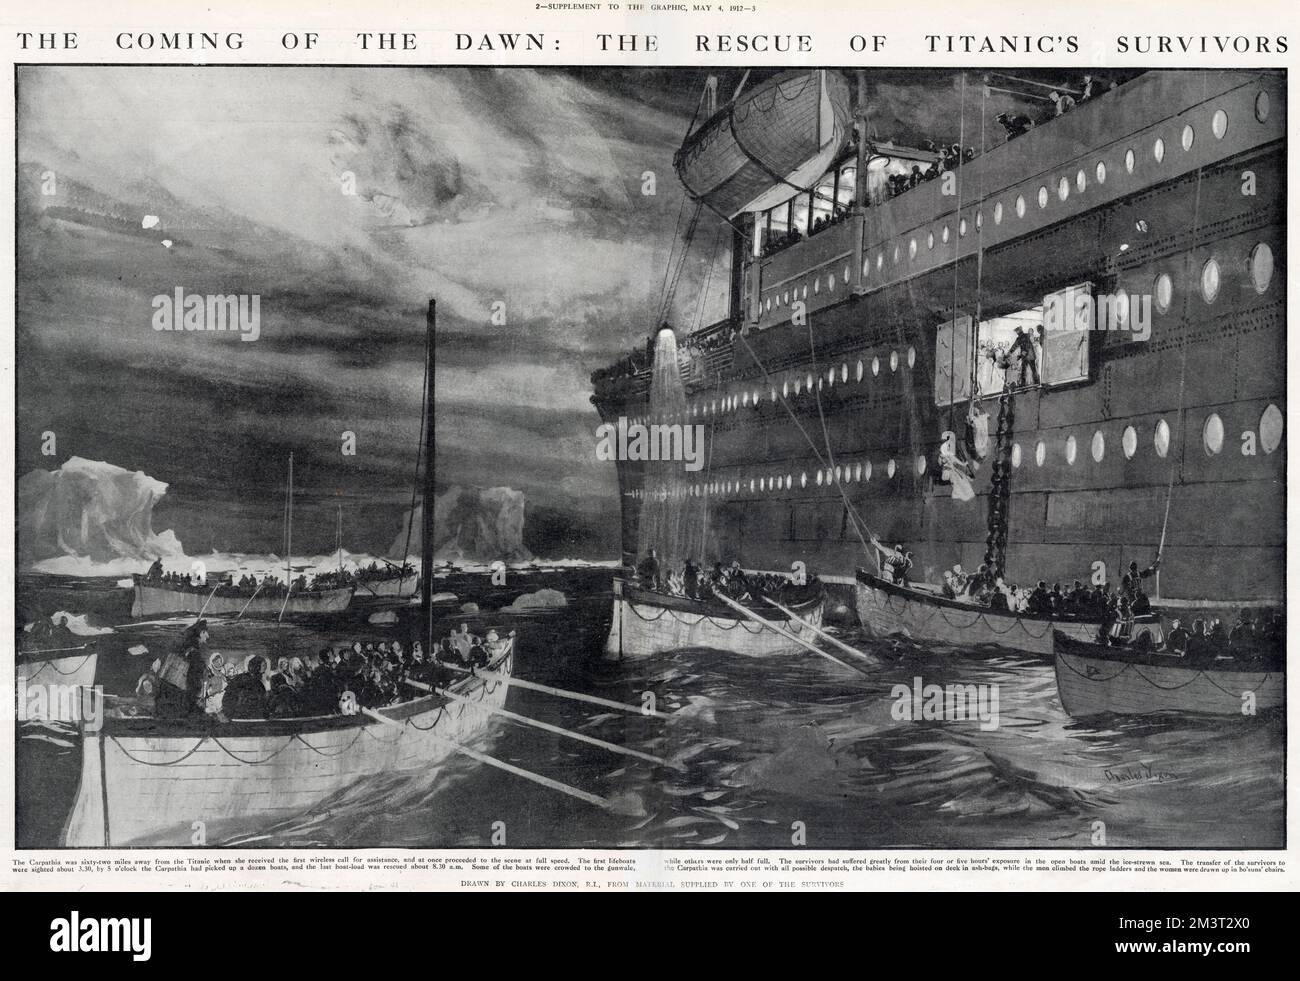 The coming of the dawn: the rescue of Titanic's survivors. The Carpathia helps the occupants of the Titanic lifeboats who had four or five hours' exposure in the open boats in the ice-strewn sea. The babies were hoisted on deck in ash-bags, while the men climbed the rope ladders and the women were drawn up in bo'suns' chairs. Stock Photo